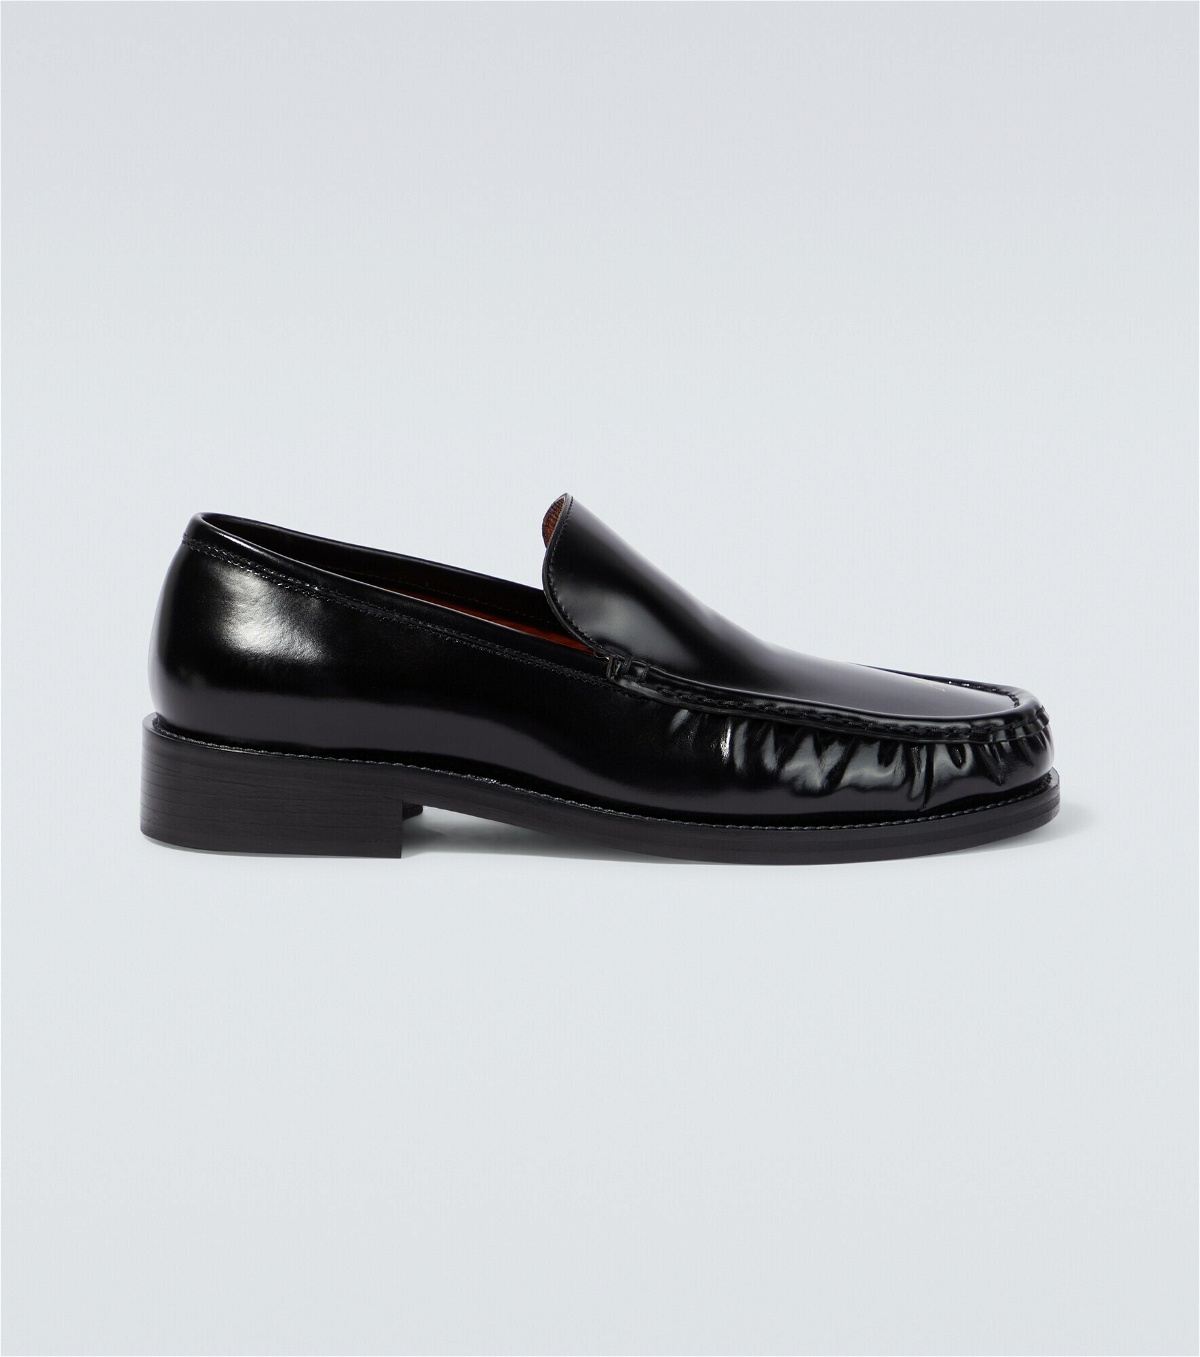 Acne Studios - Embellished leather loafers Acne Studios